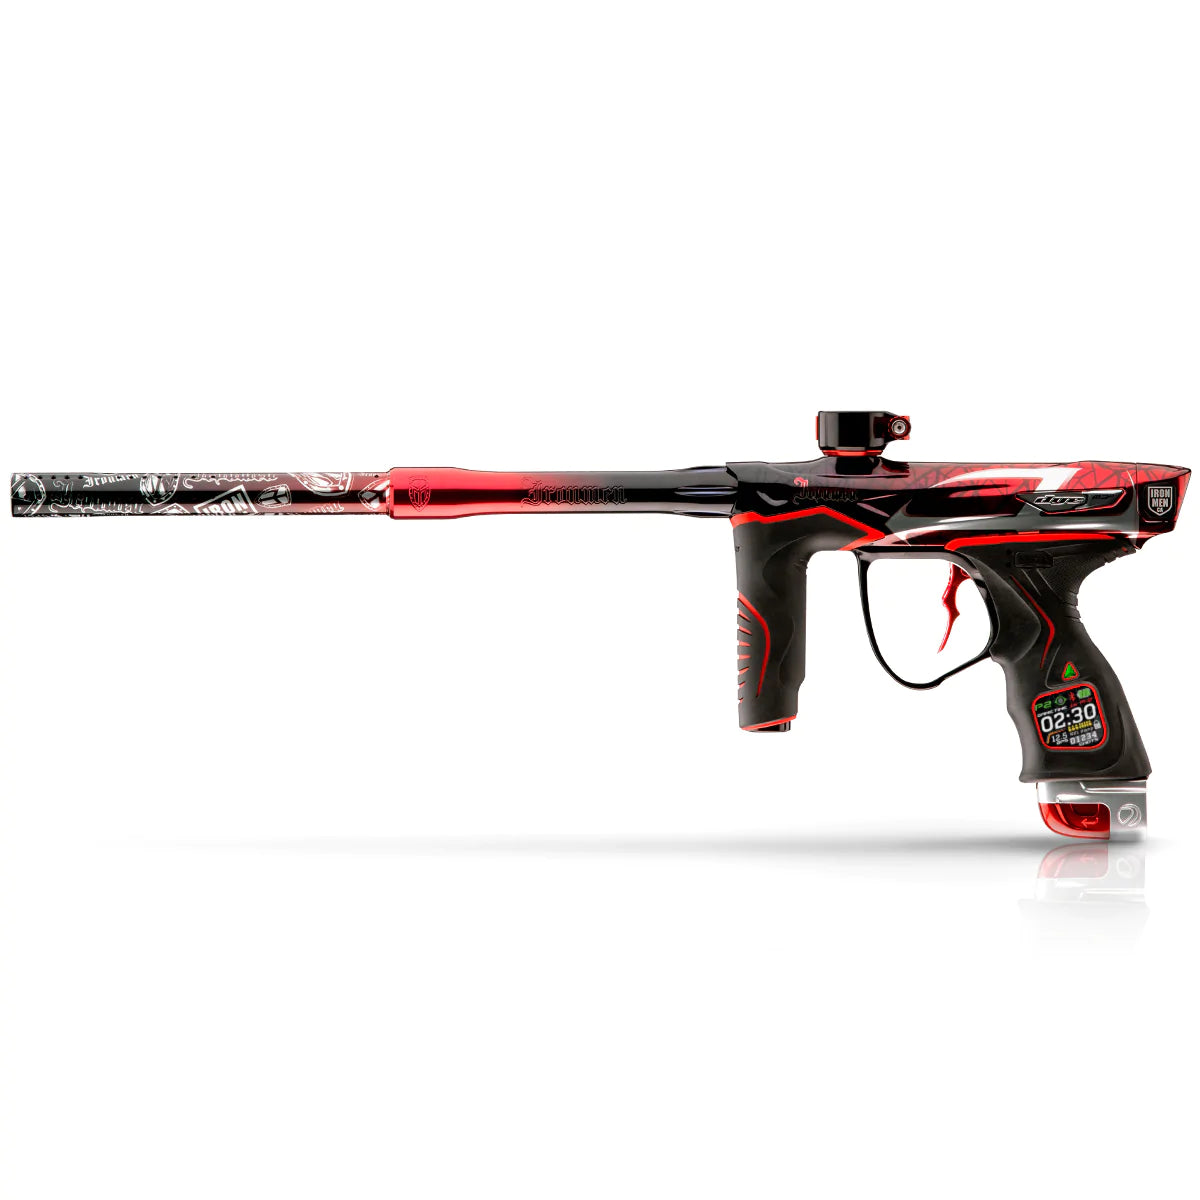 Dye M3+ Paintball Marker Ironman (Limited Edition)